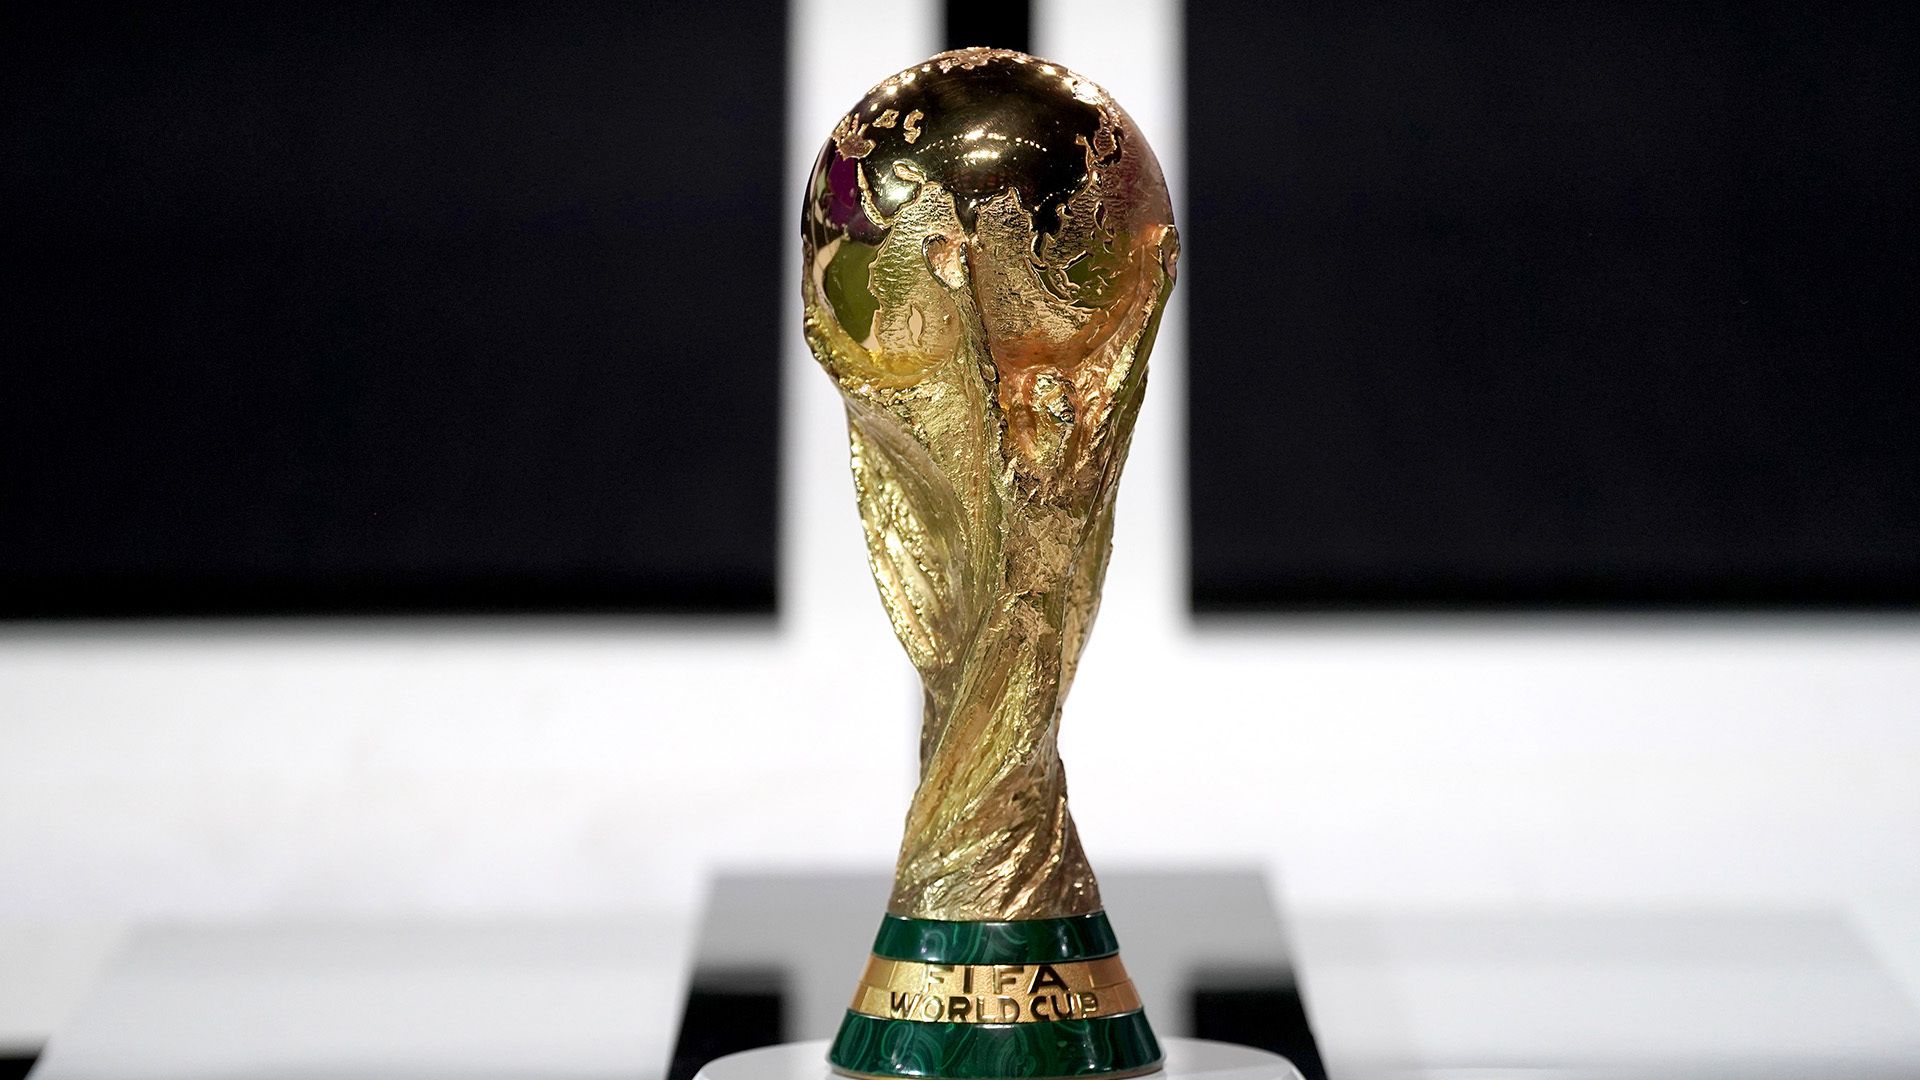 Ukraine to join Spain-Portugal bid to host 2030 World Cup